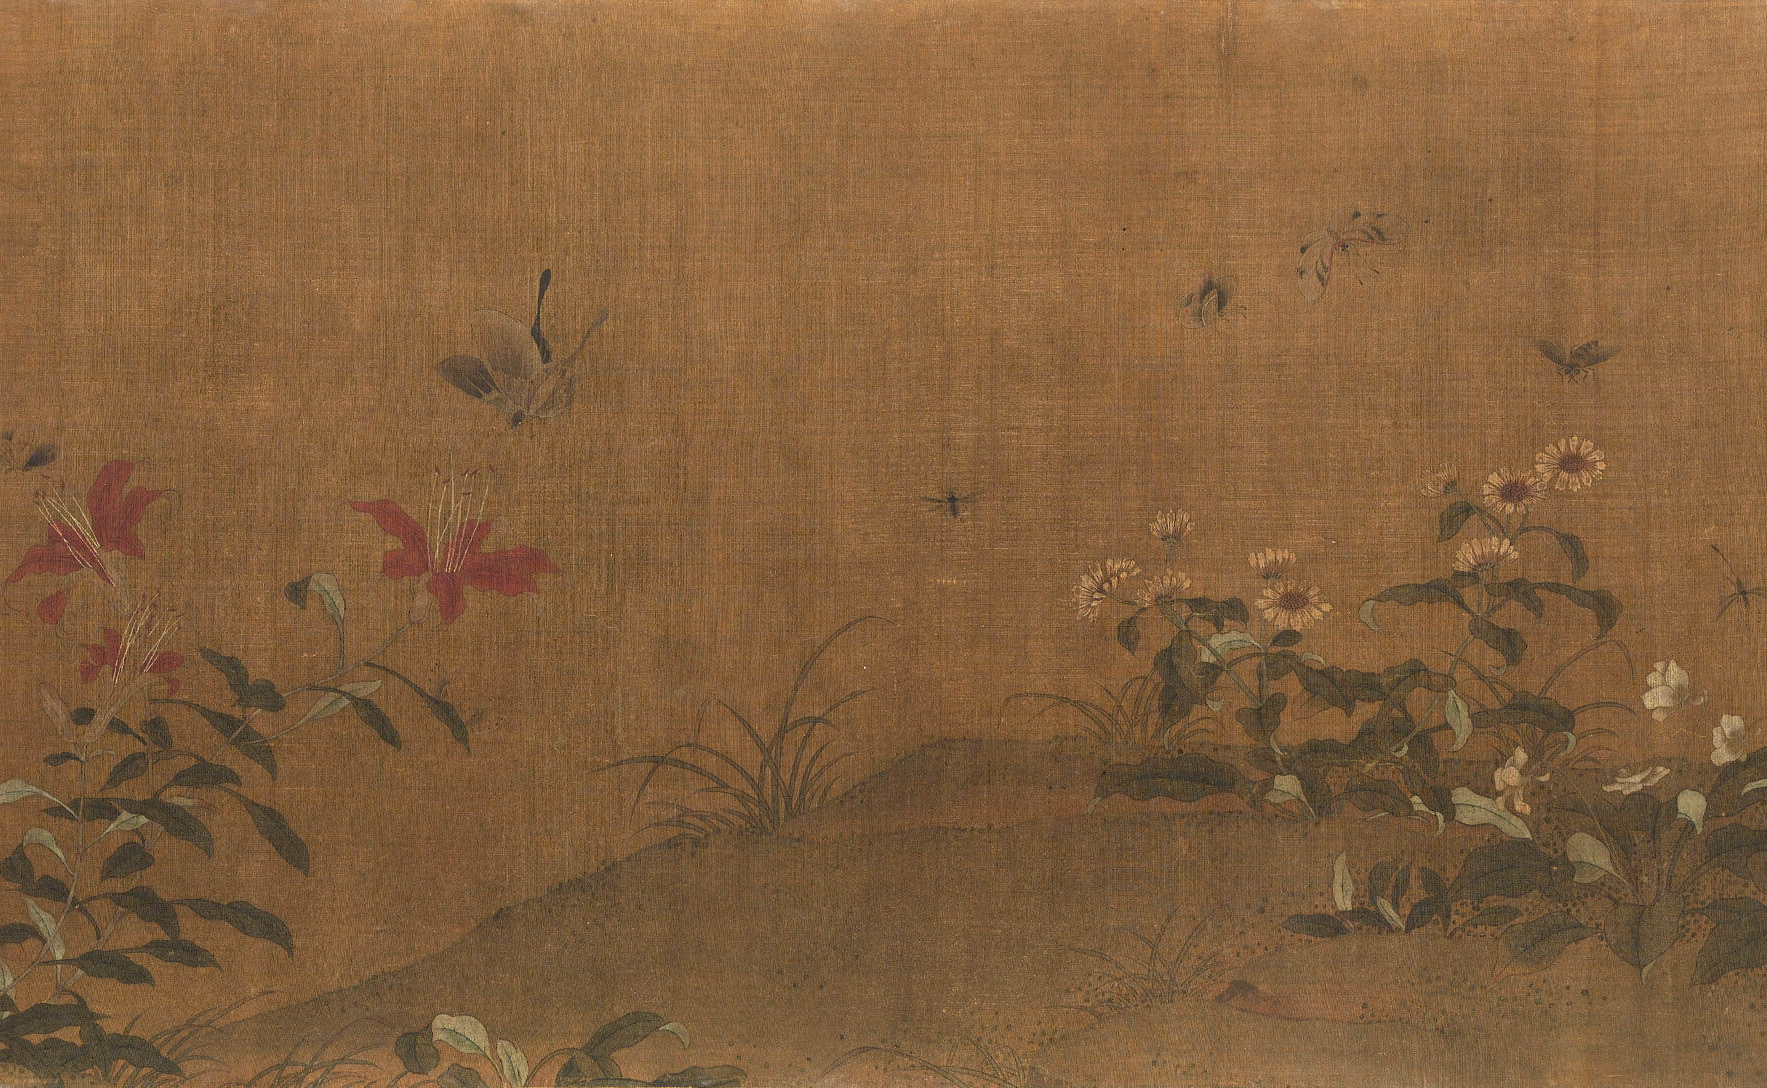 Northern Song Dynasty painting captures flowers, insects